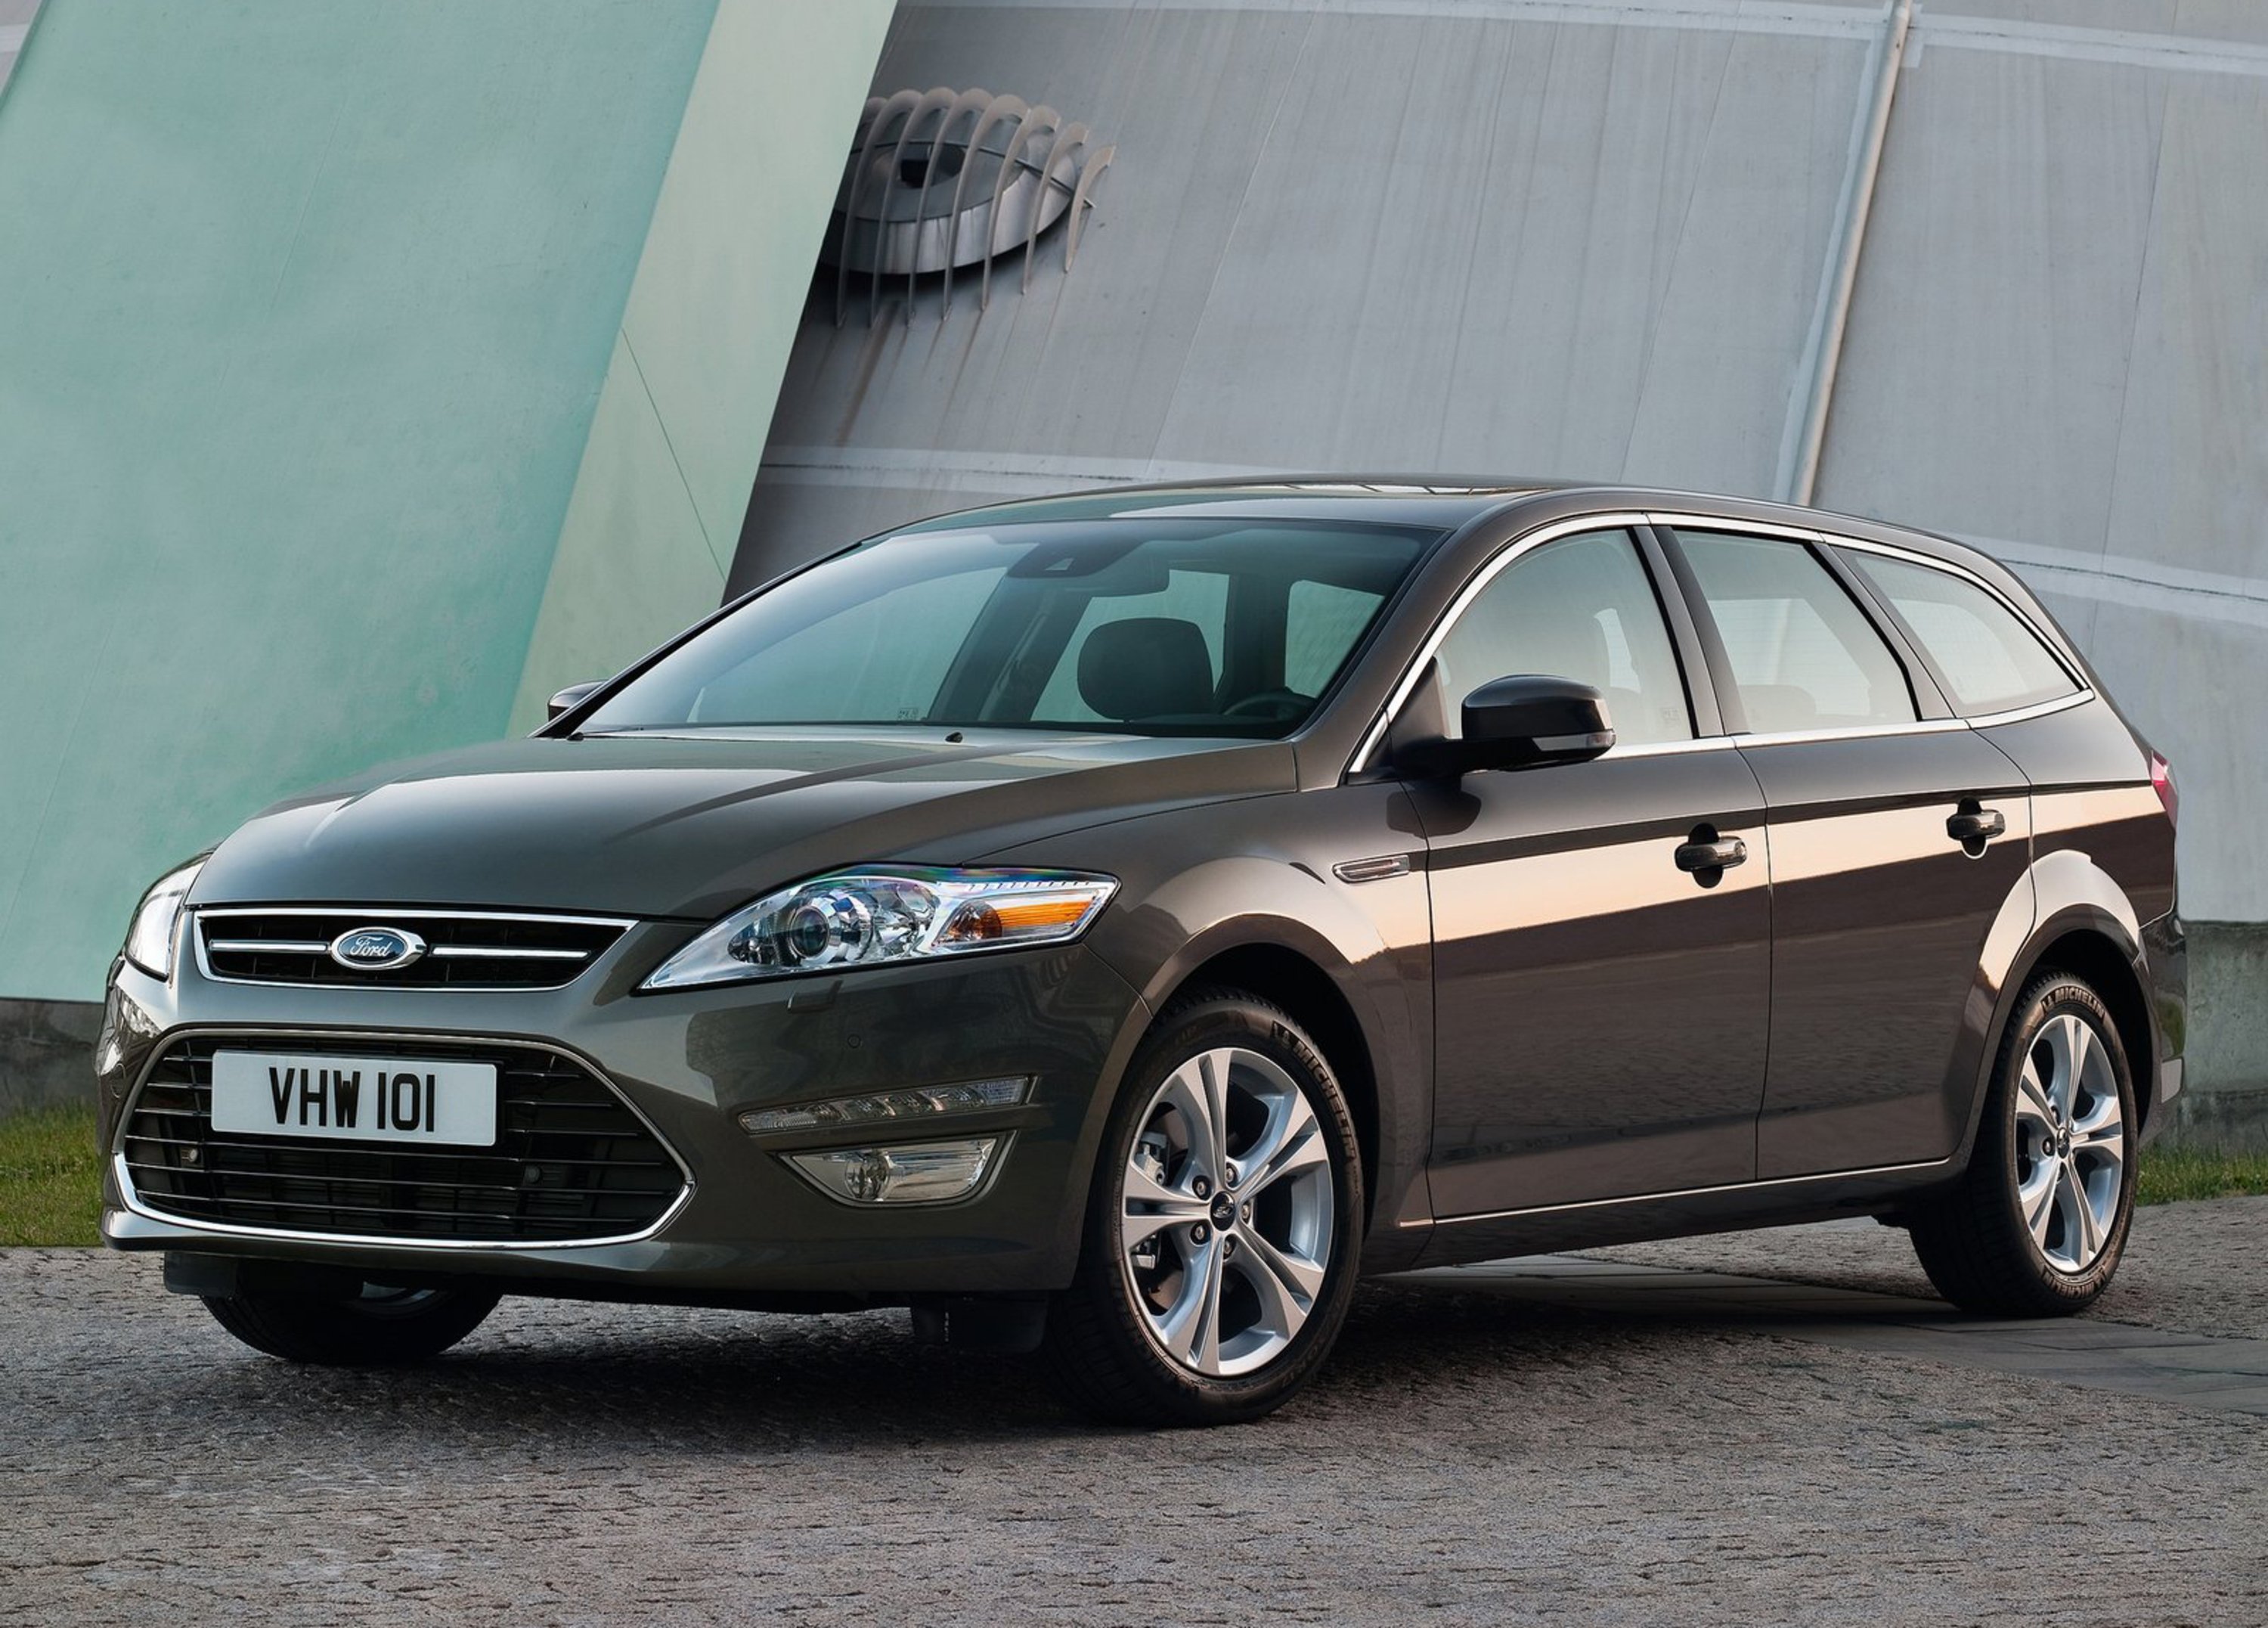 Ford Mondeo Station Wagon (2007-14)